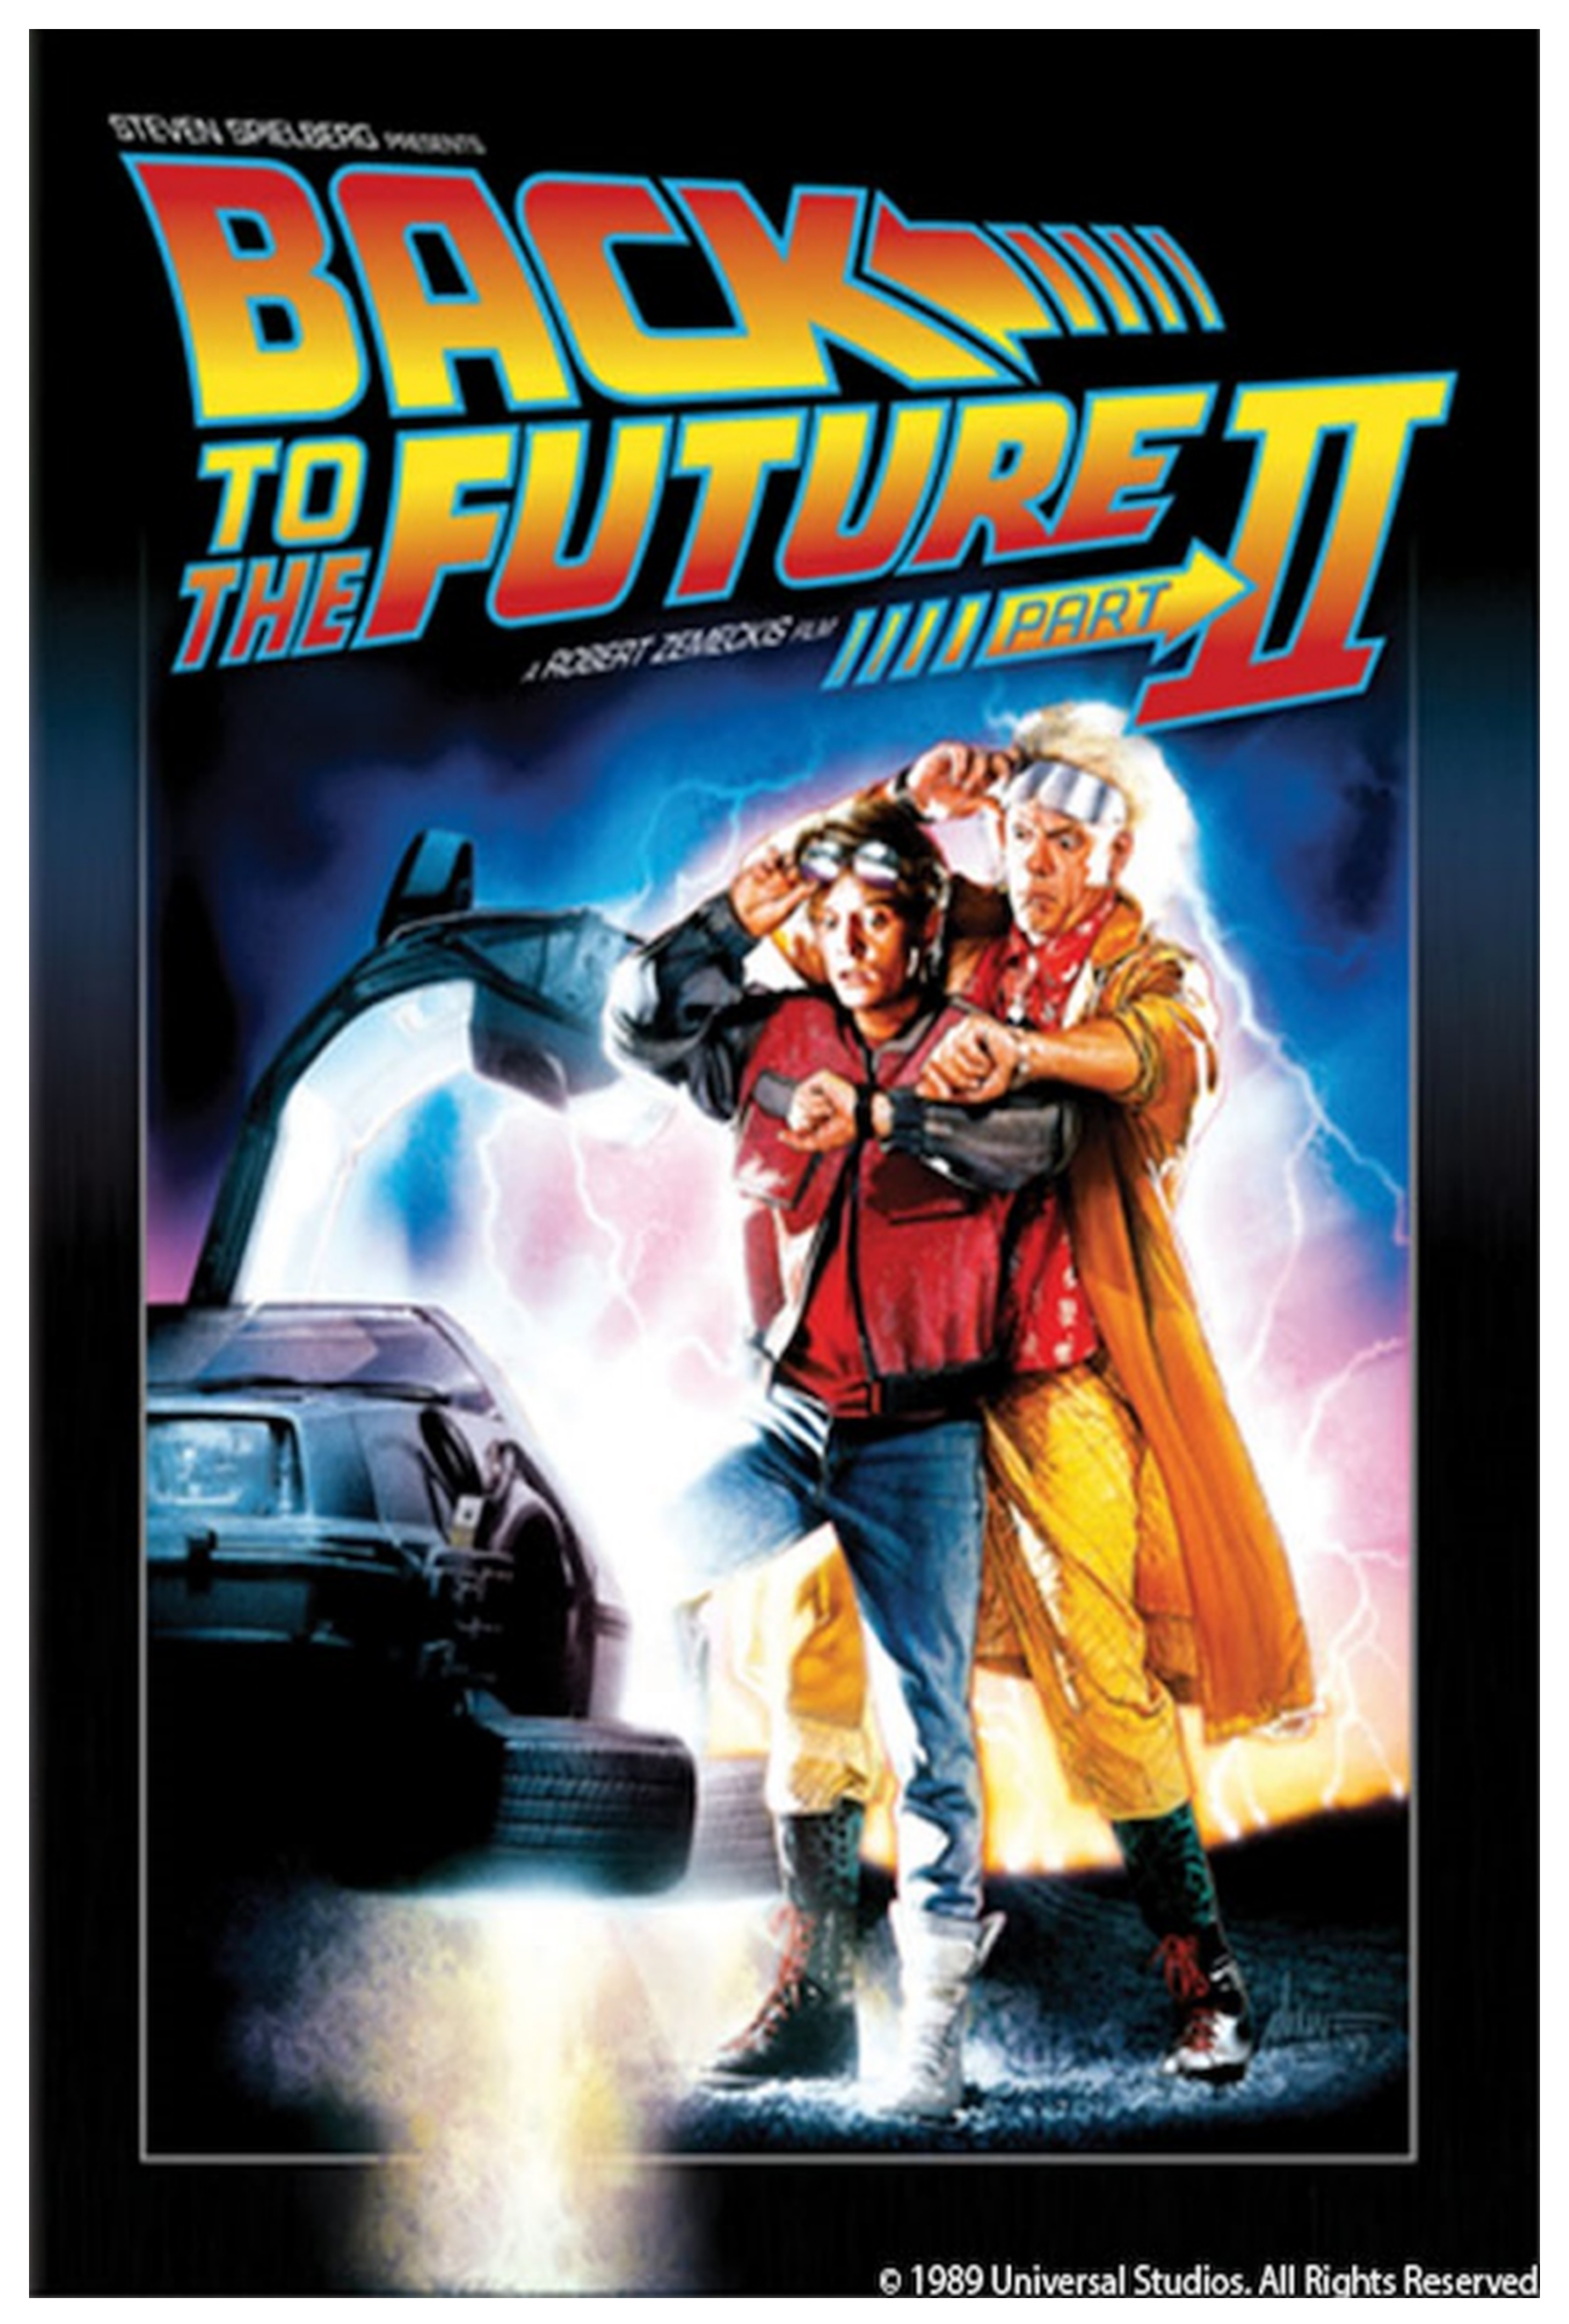 poster for Back to the Future II